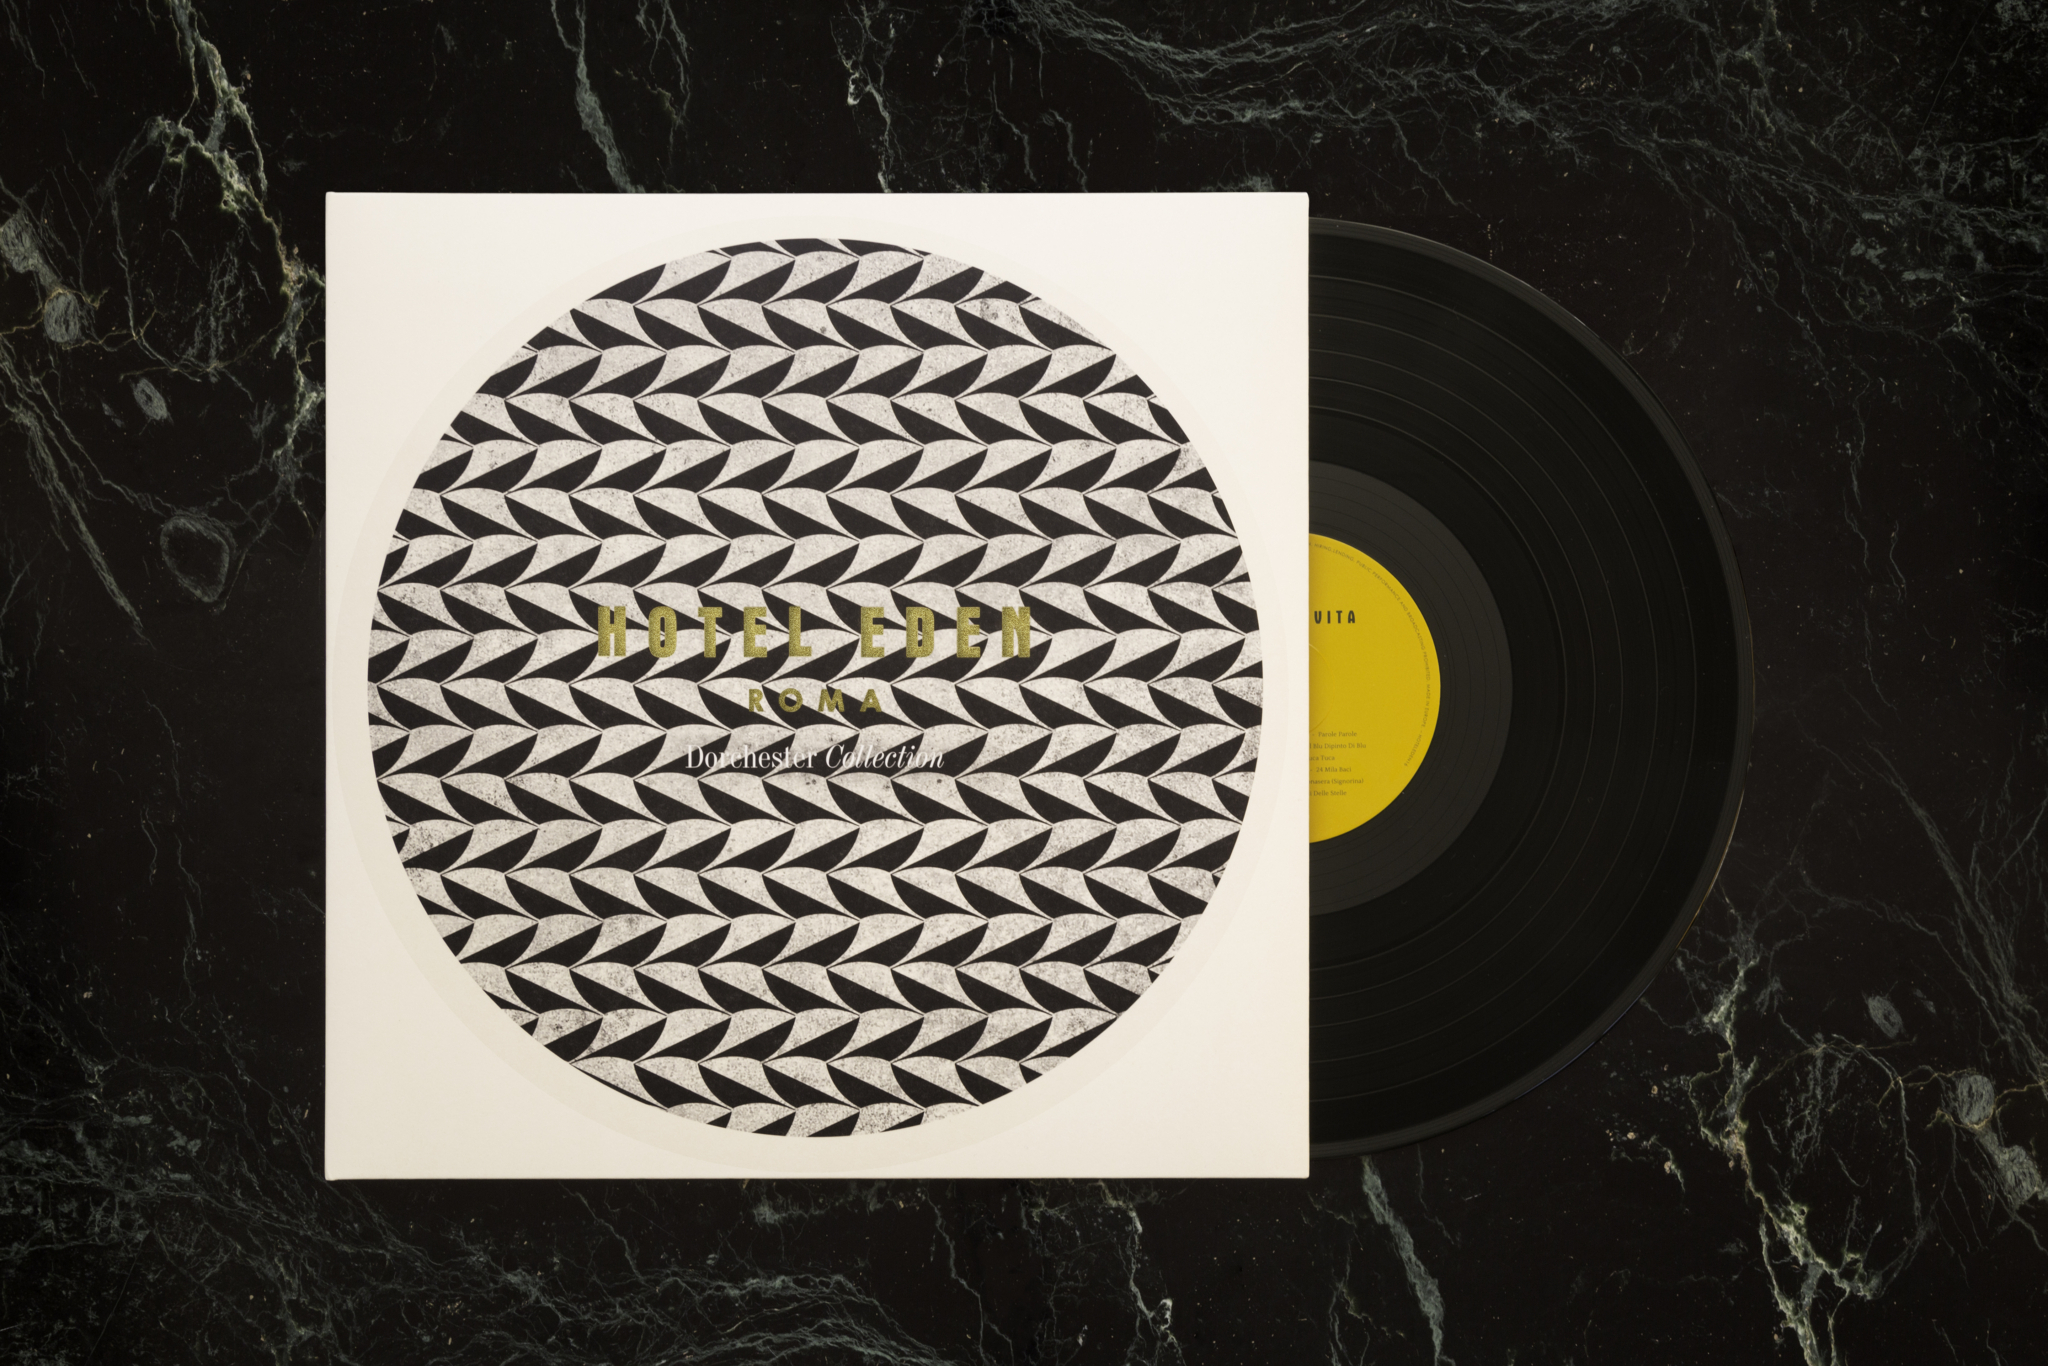 Vinyl record designed and curated by & Smith for Hotel Eden.